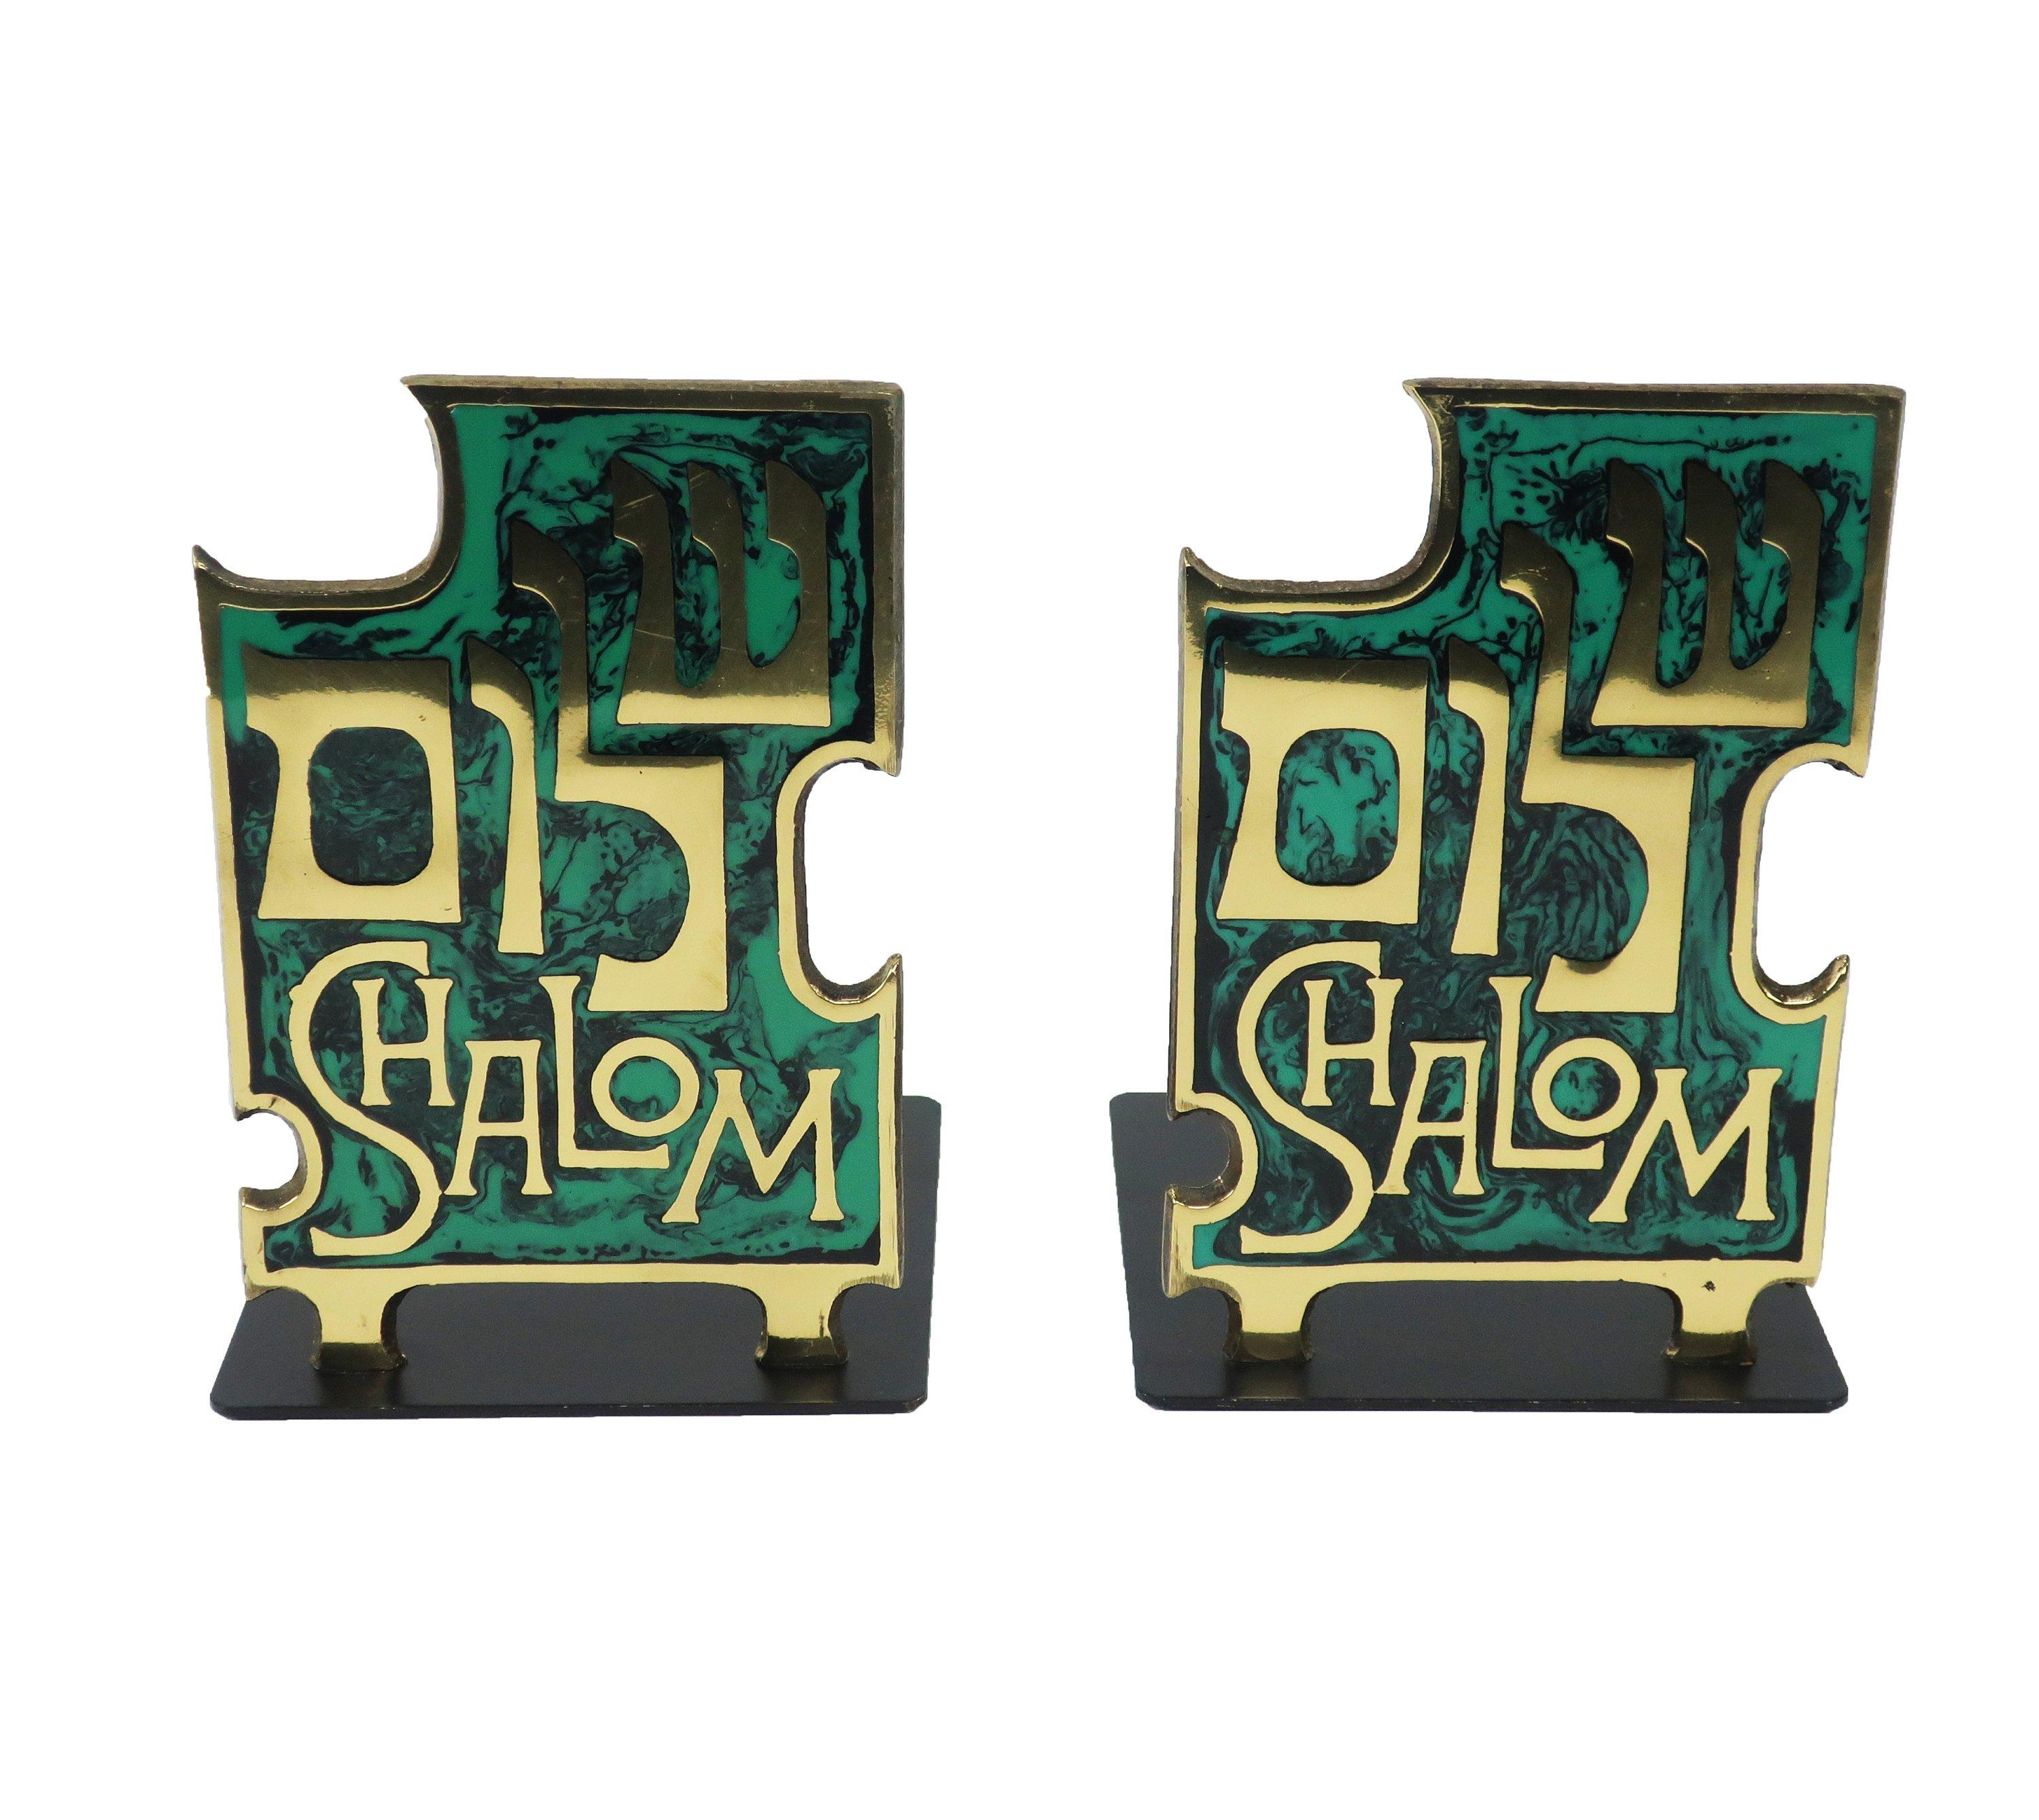 A lovely pair of Mid-Century Modern brass and enameled metal book ends with Hebrew lettering and “SHALOM” in English. Likely made in Israel in the late 1960s or 1970s.

In excellent vintage condition.
 
5